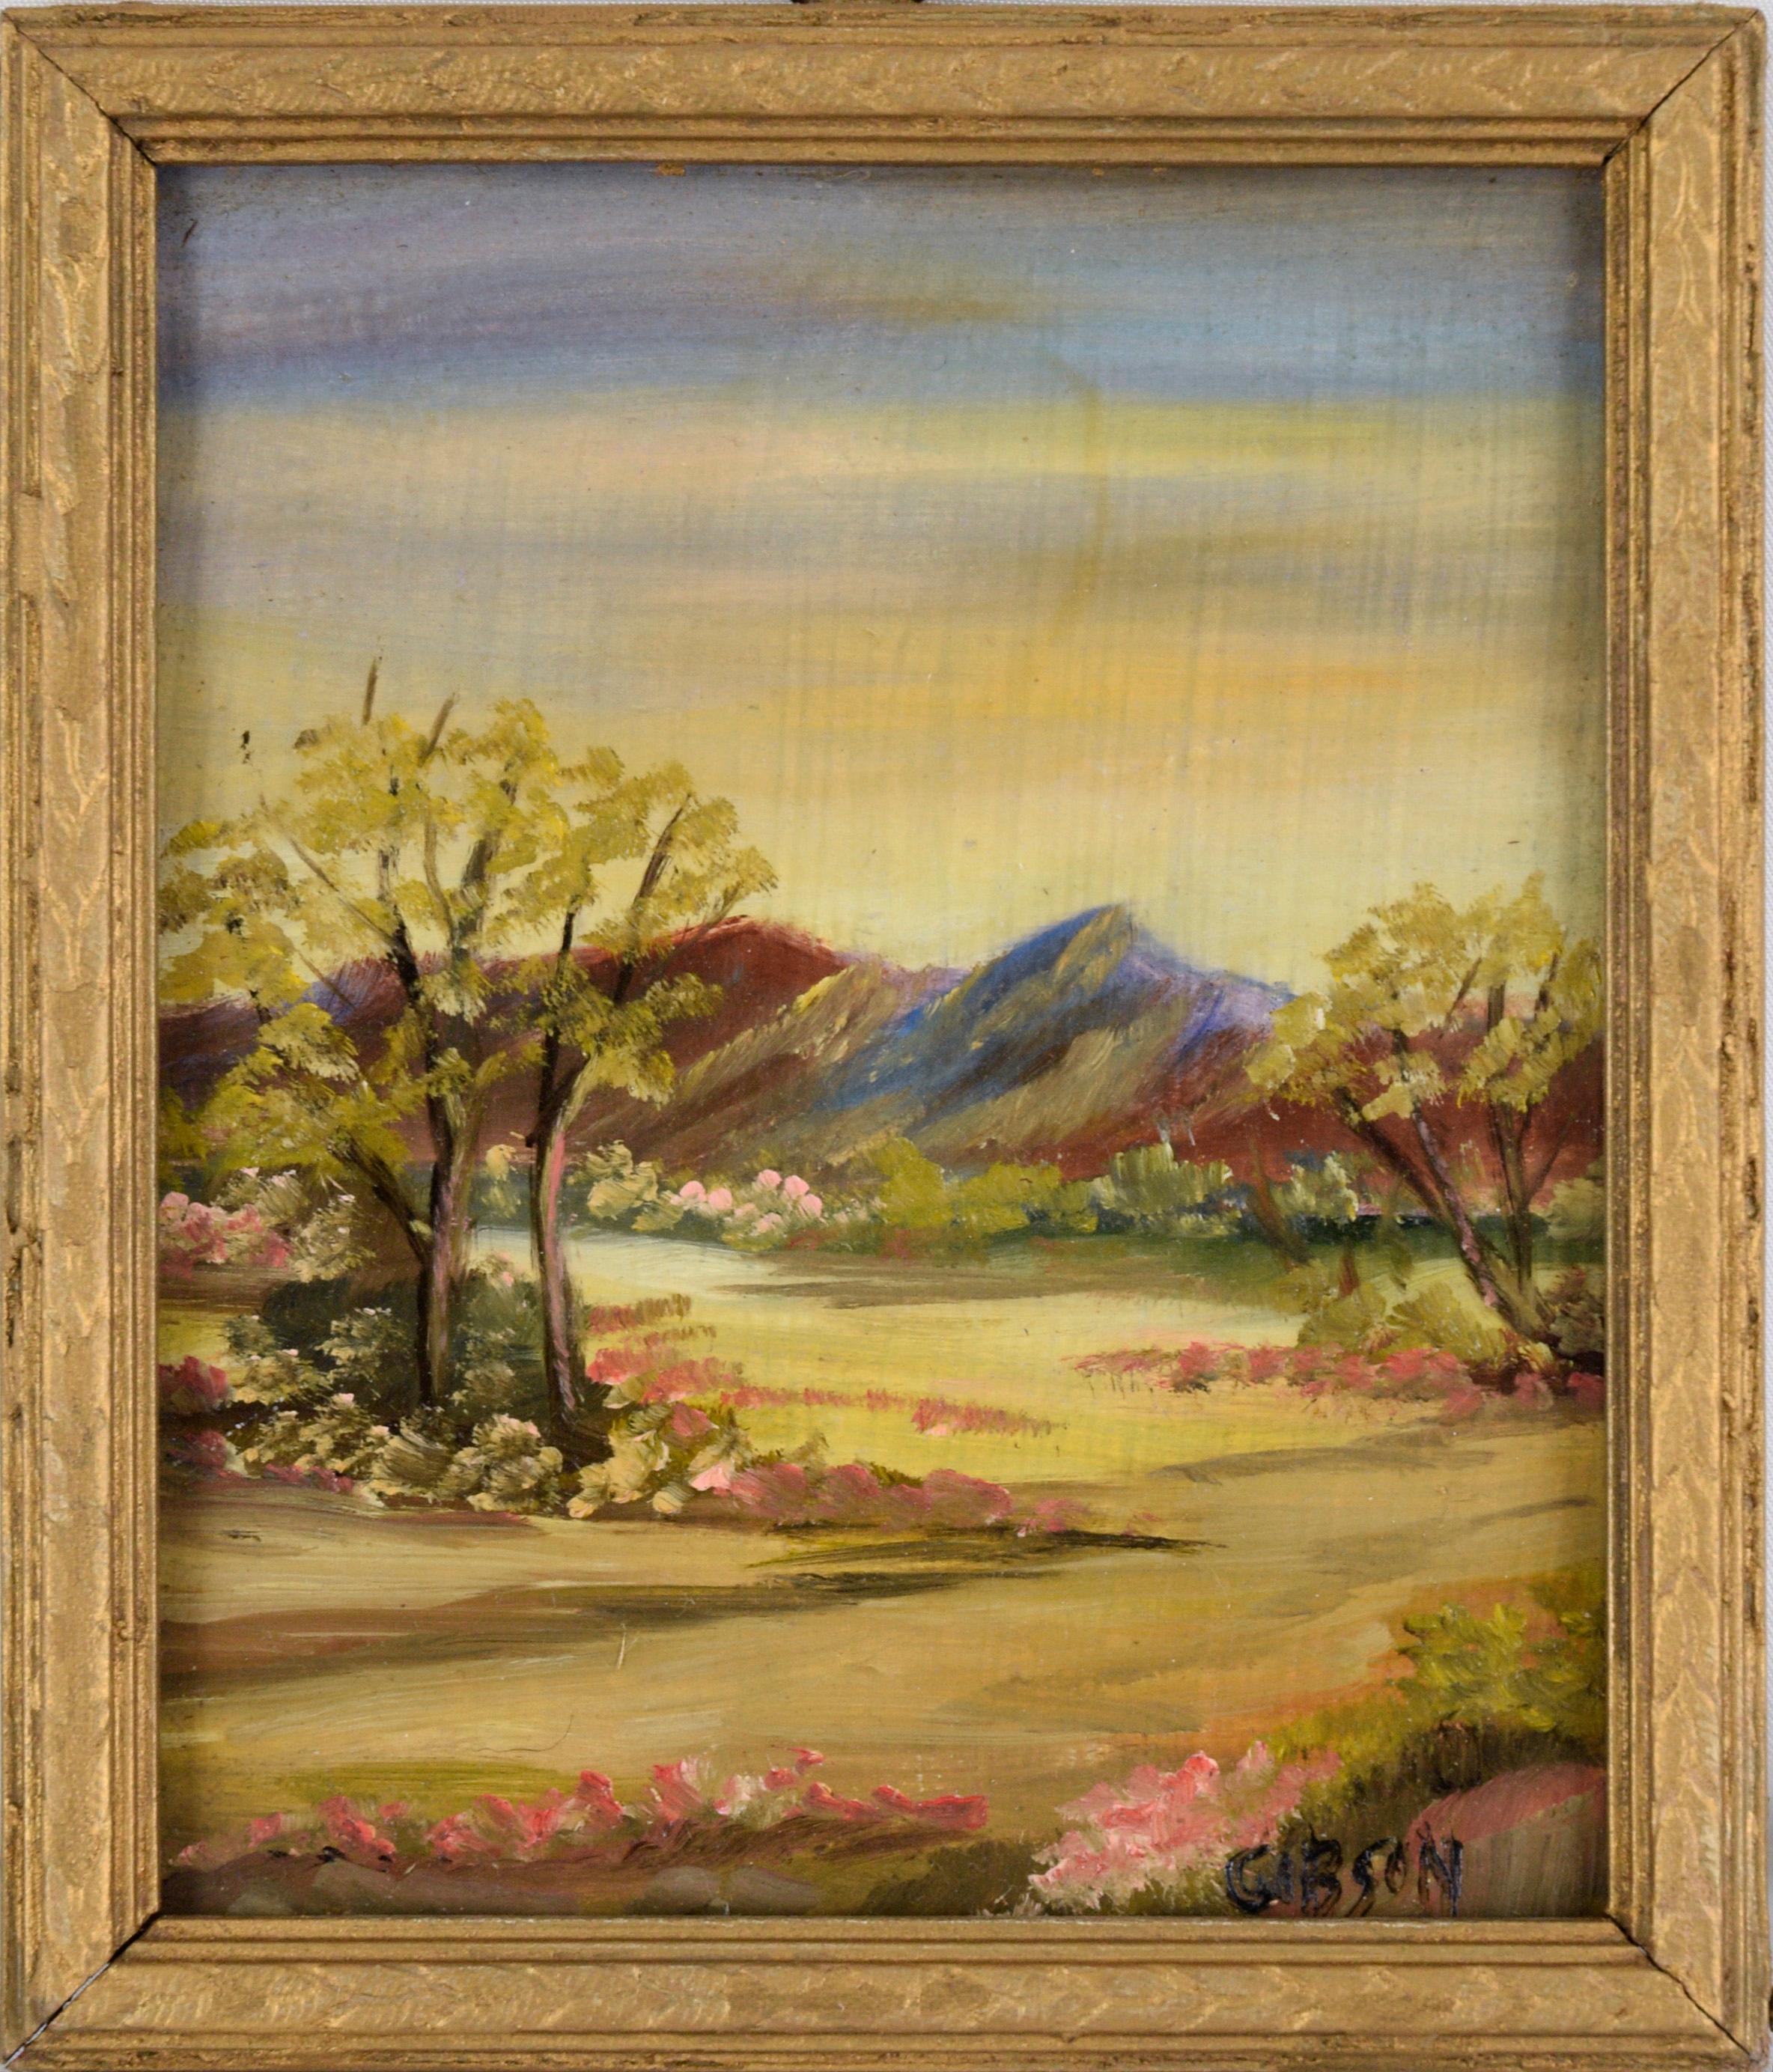 Unknown Landscape Painting - Spring Valley Plein Air Landscape in Oil on Masonite by Gibson